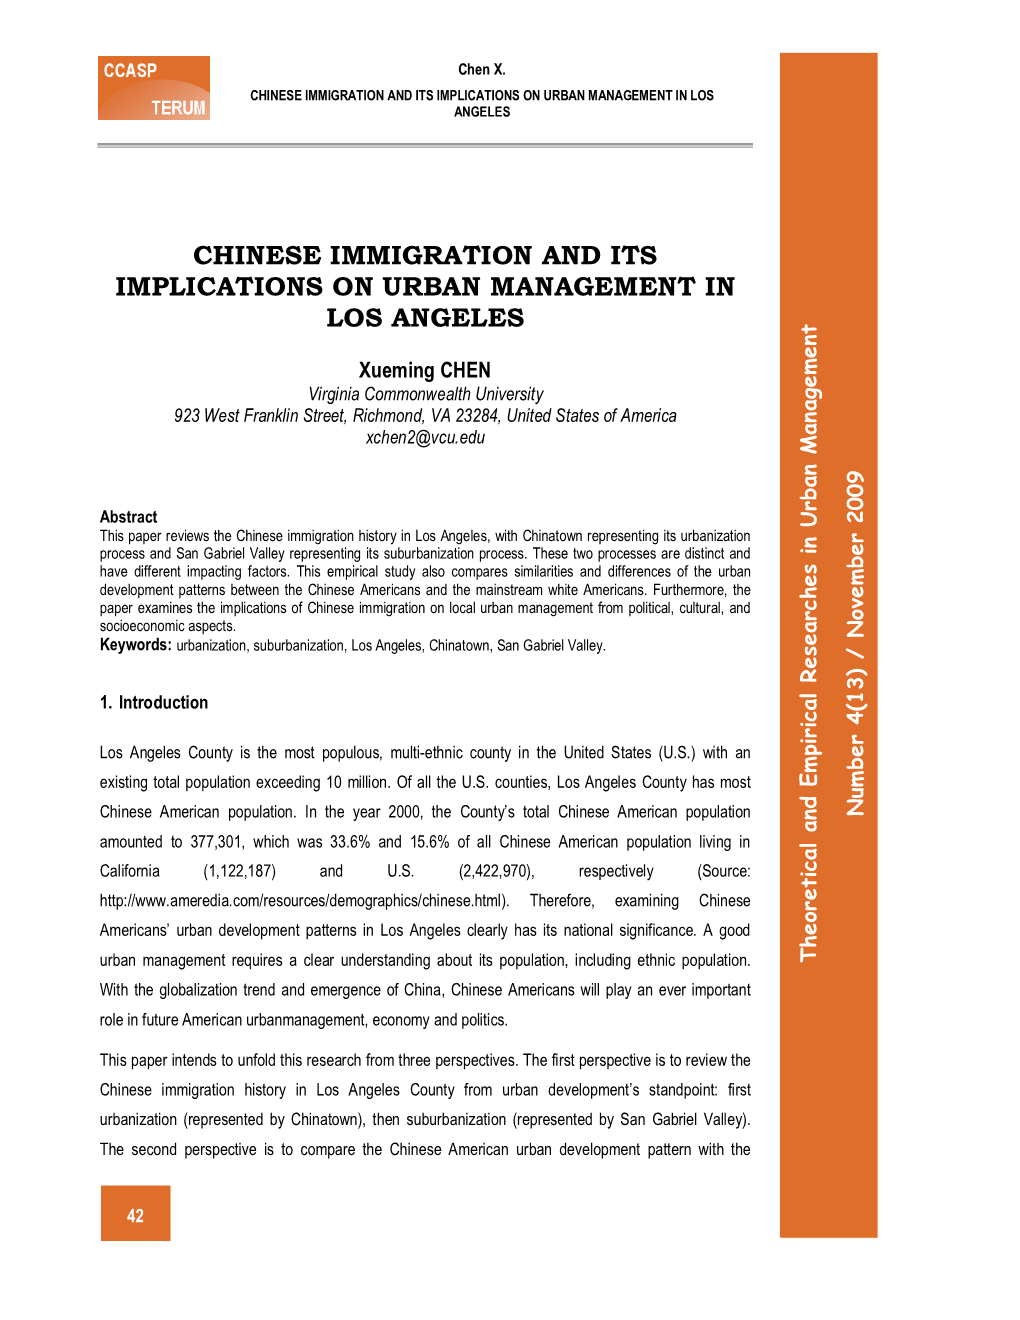 Chinese Immigration and Its Implications on Urban Management in Los Angeles